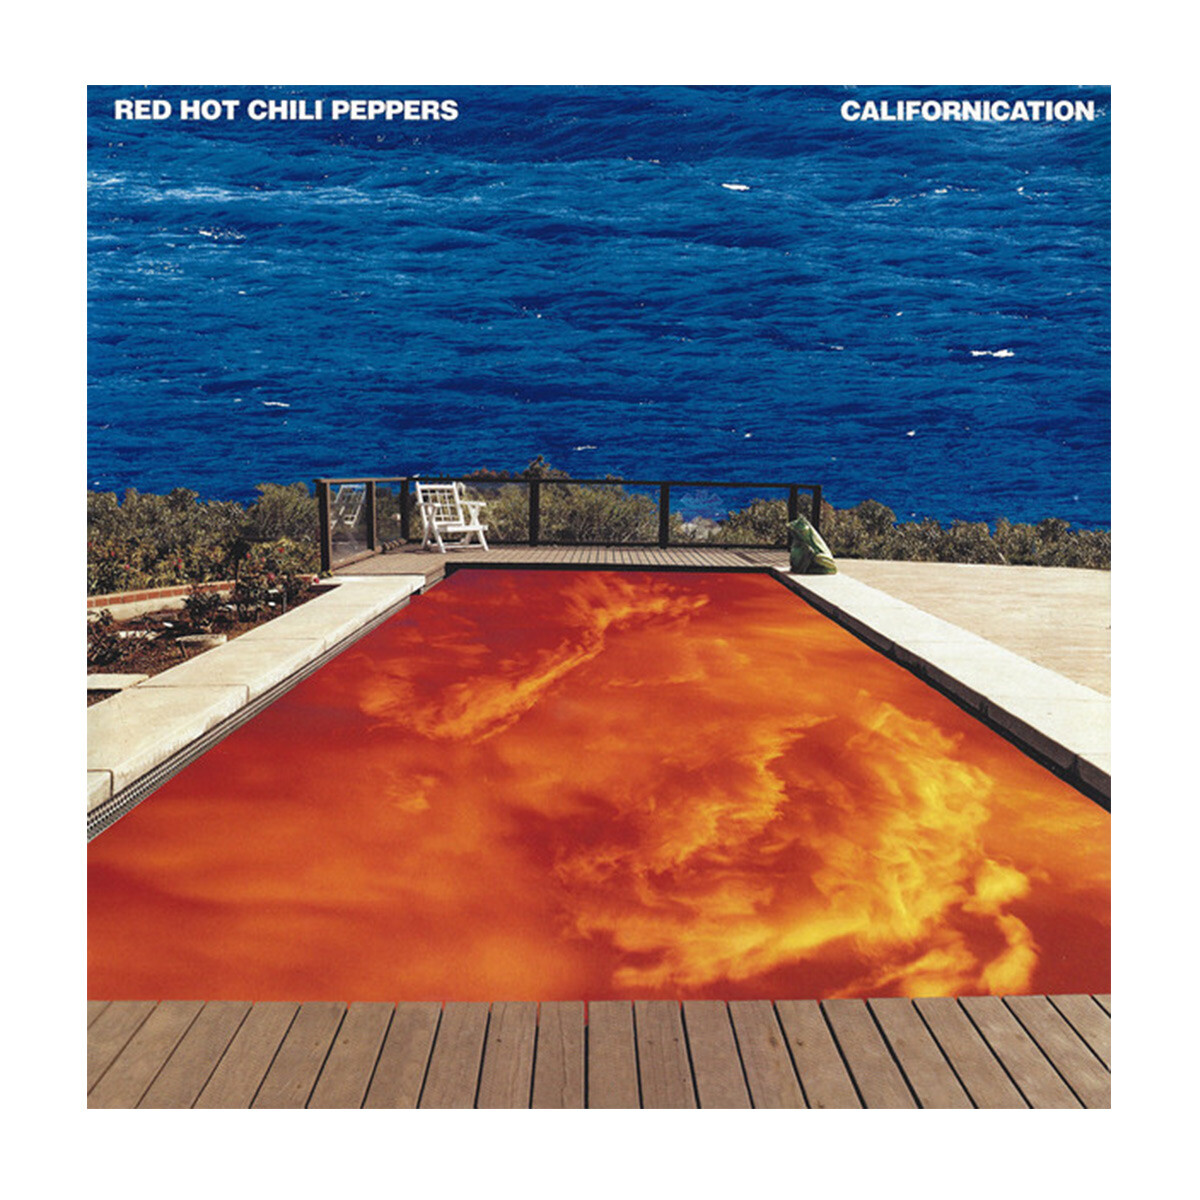 Red Hot Chili Peppers-californication (arg) - Cd 